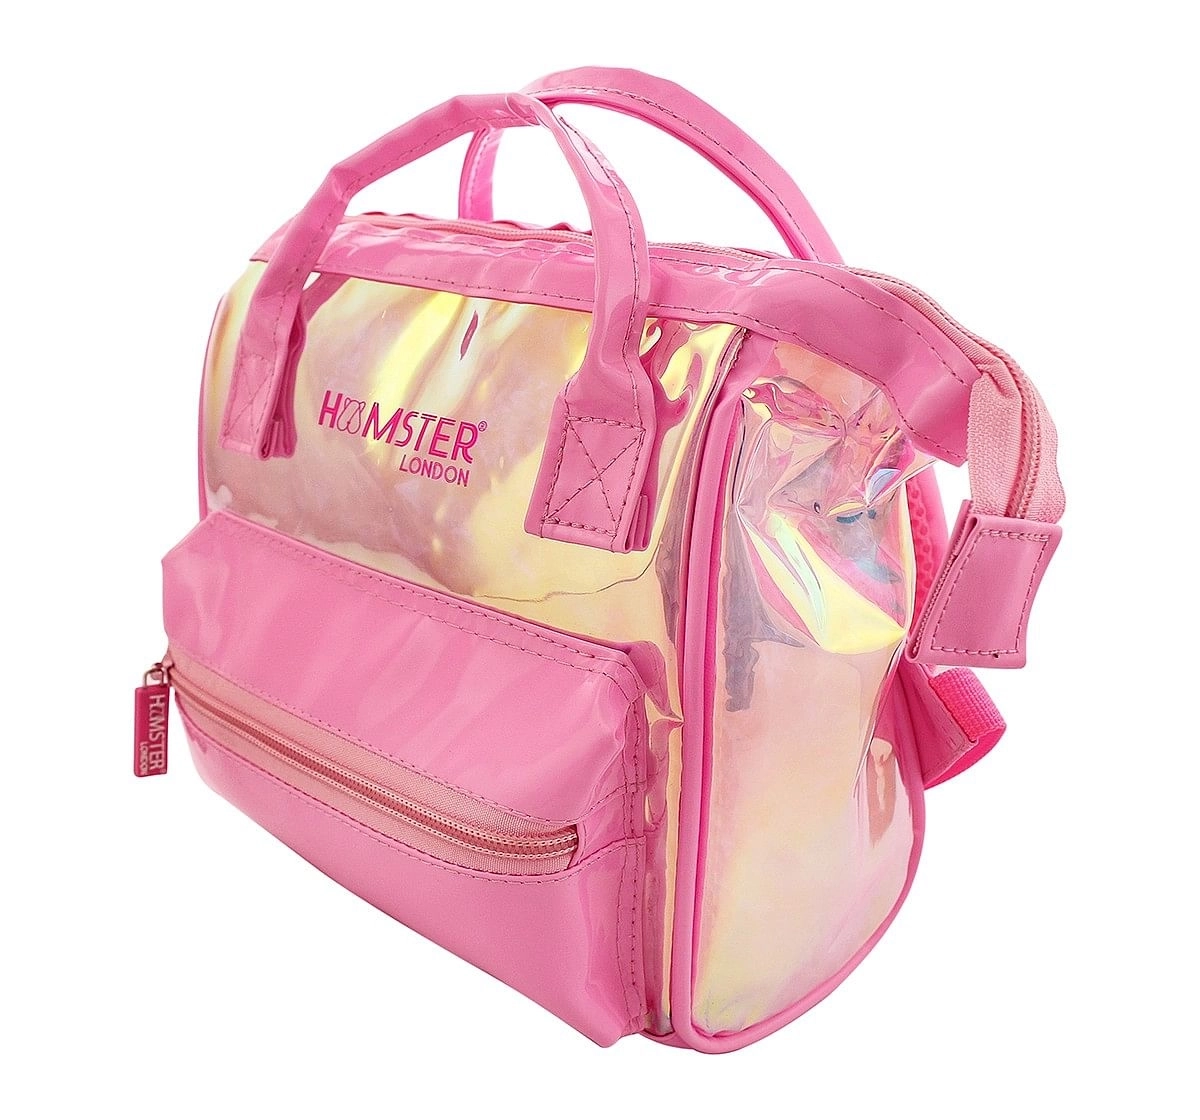 Hamster London Mini Backpack with Handle for age 3Y+ (Pink)